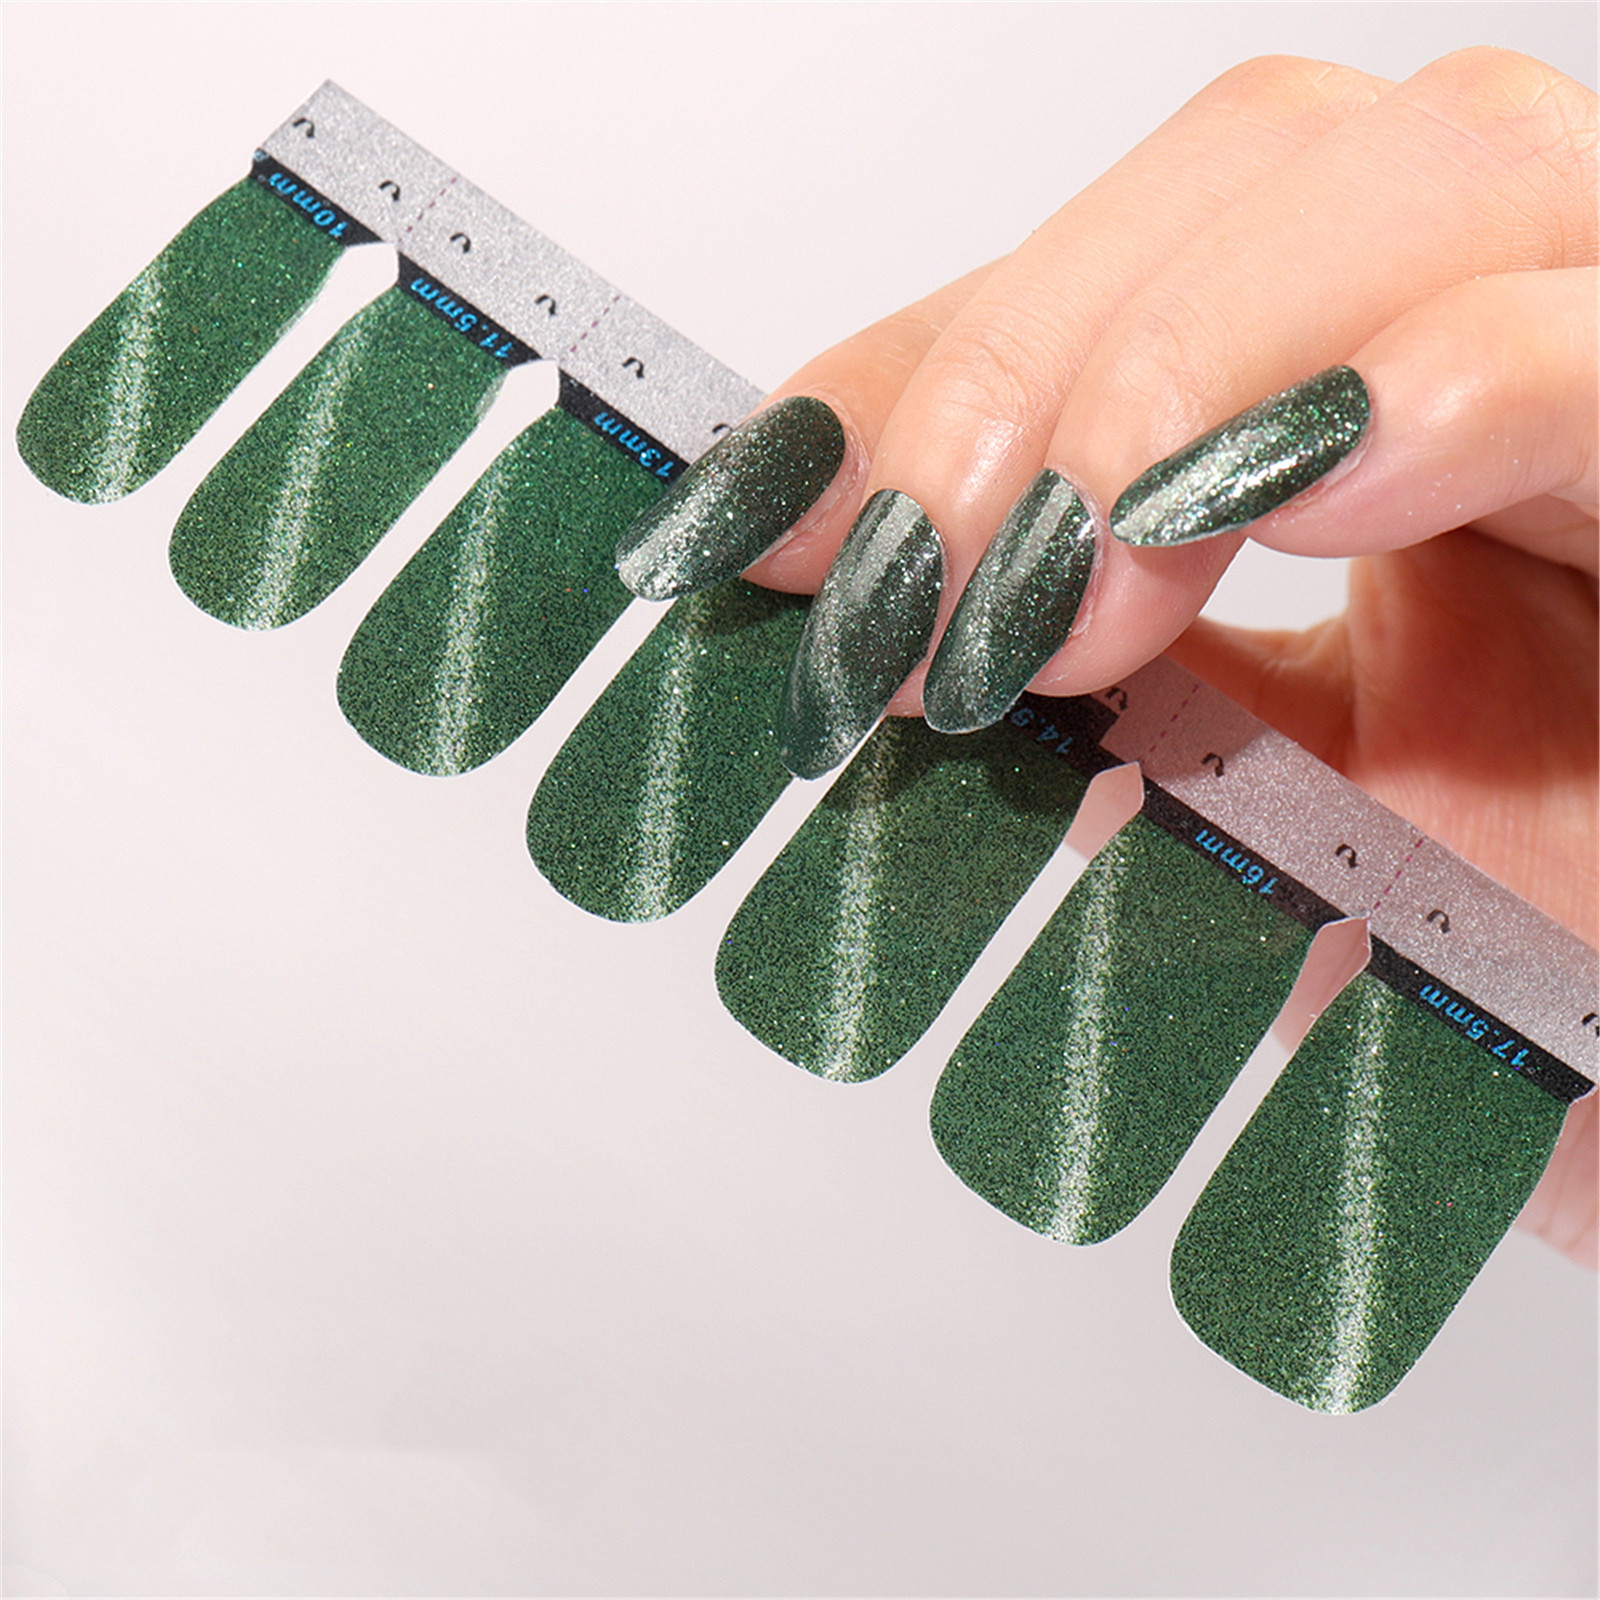 Tejiojio HoliDay Home Trends Color Nail Polish Strips Wraps DIY Decals Beauty Nail Stickers Full Cover - image 1 of 3